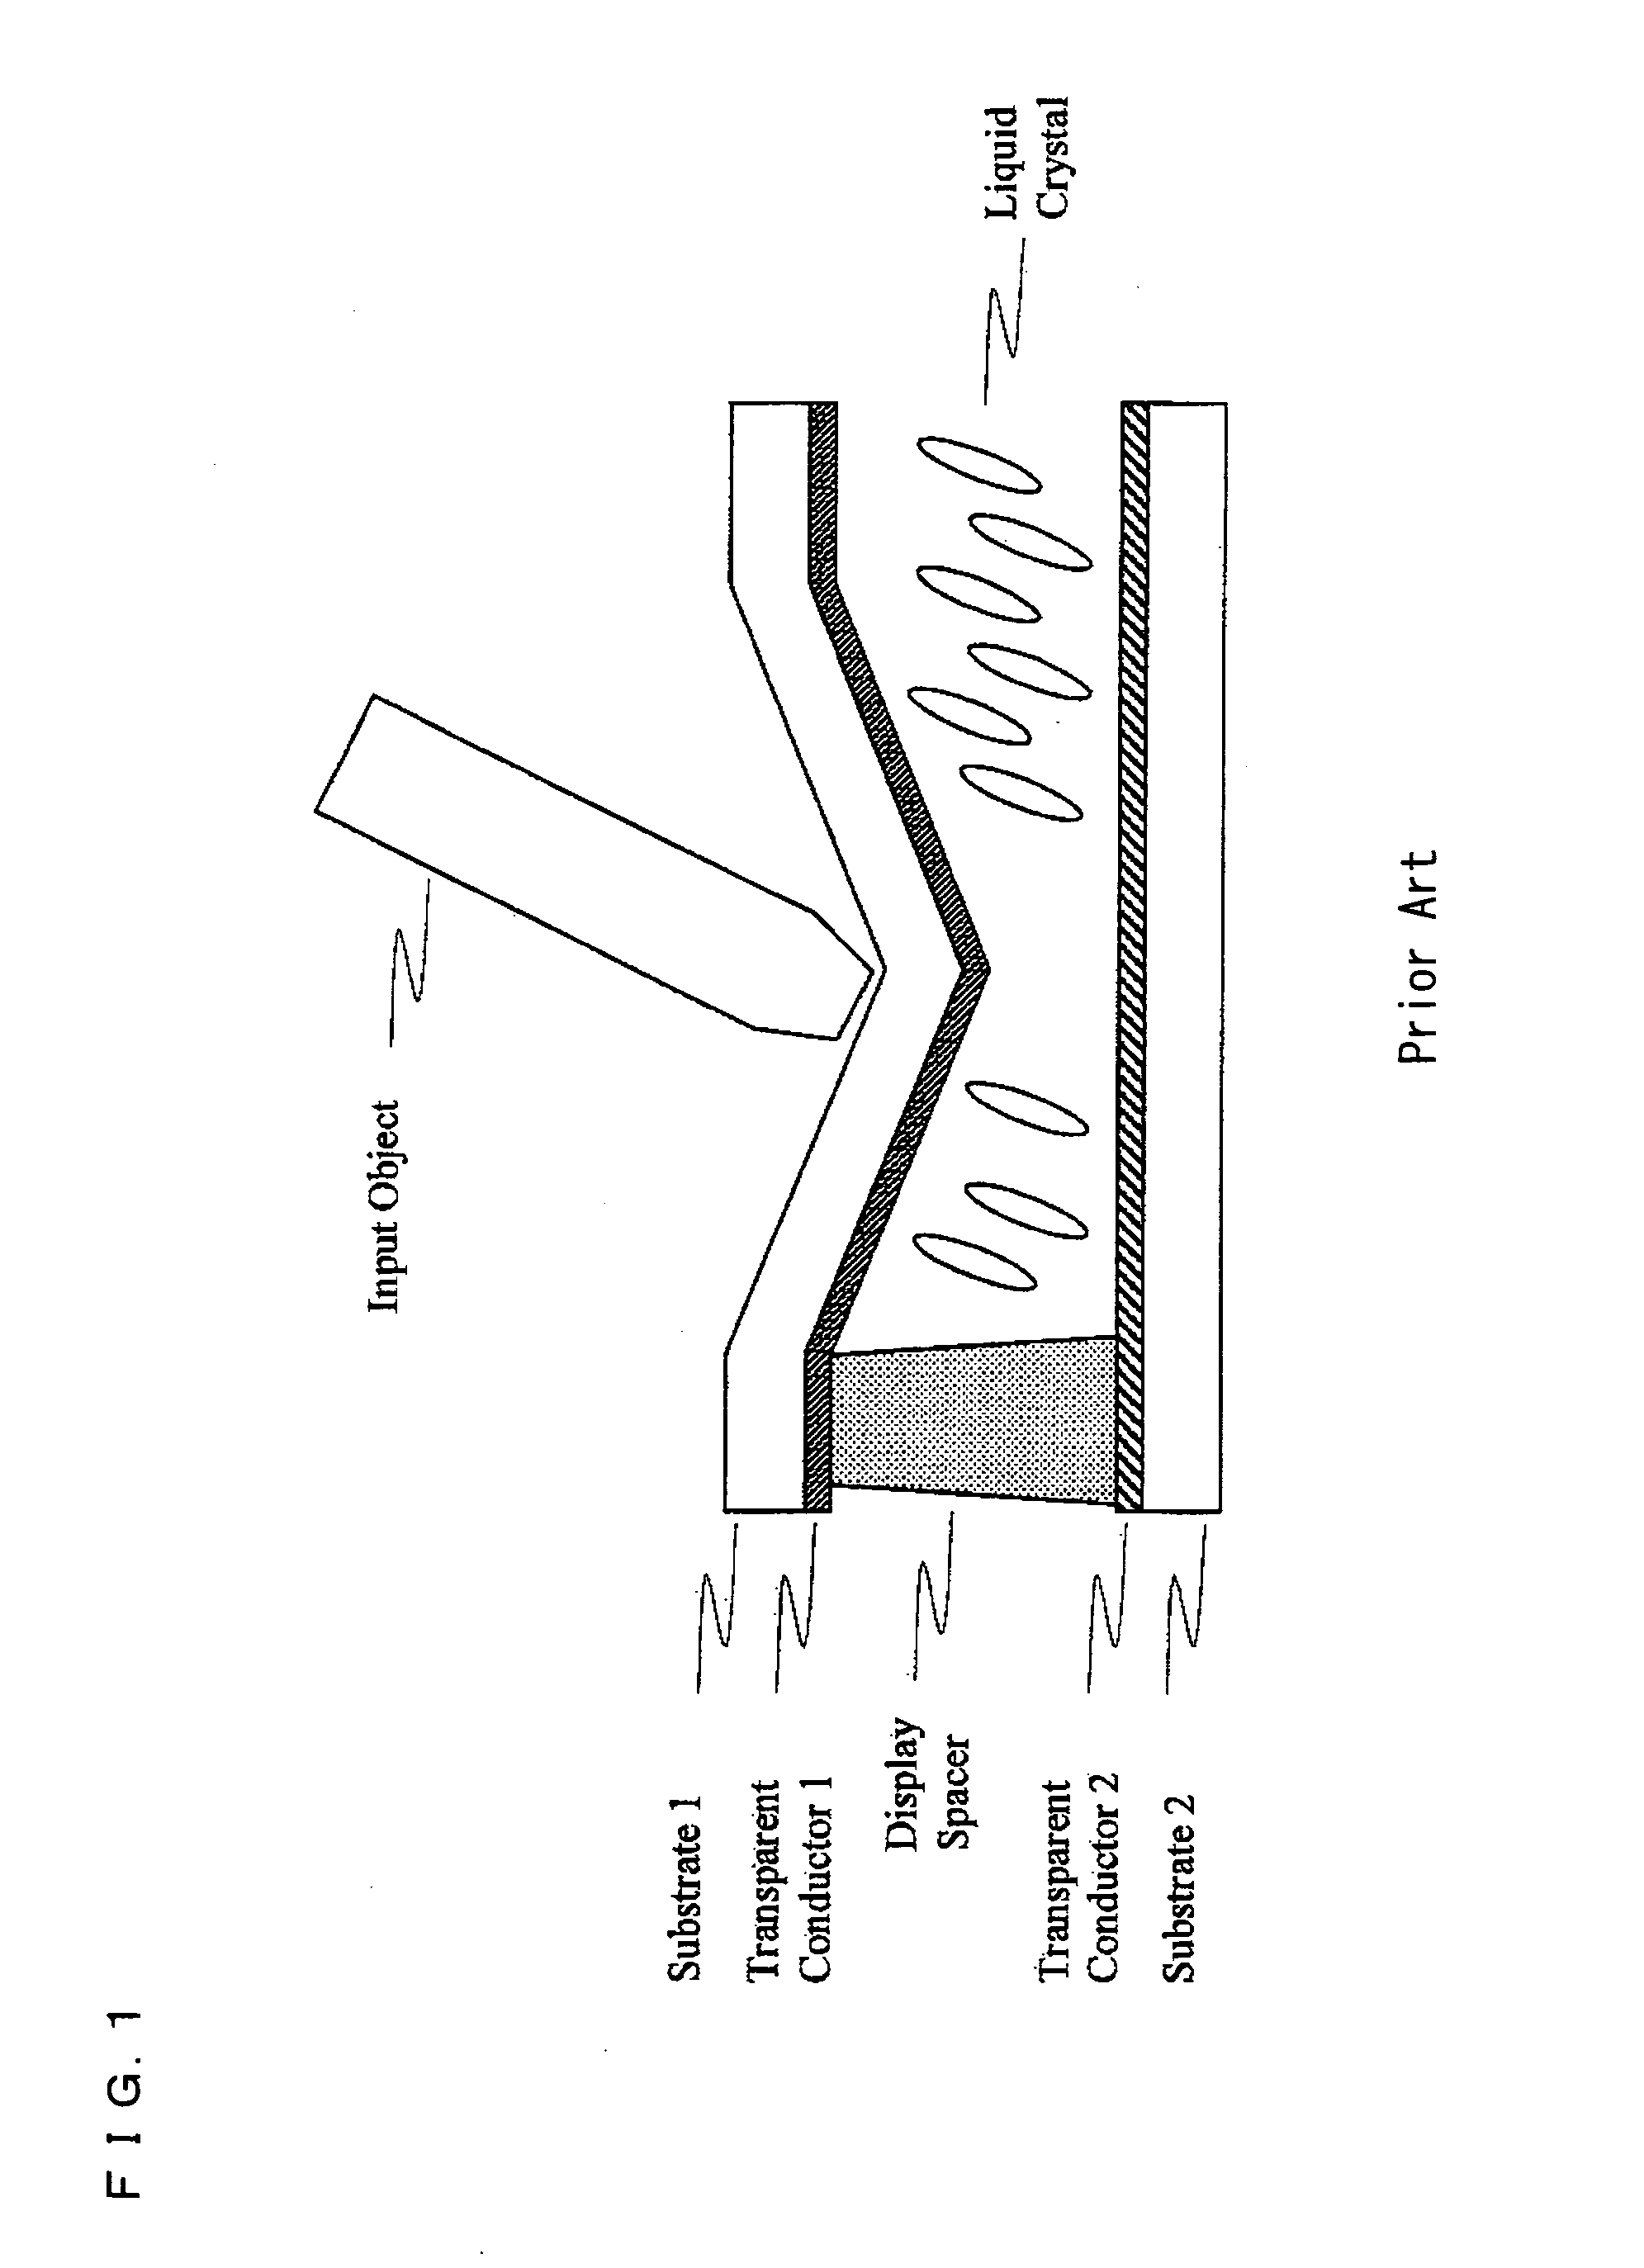 Liquid crystal device comprising array of sensor circuits with voltage-dependent capacitor